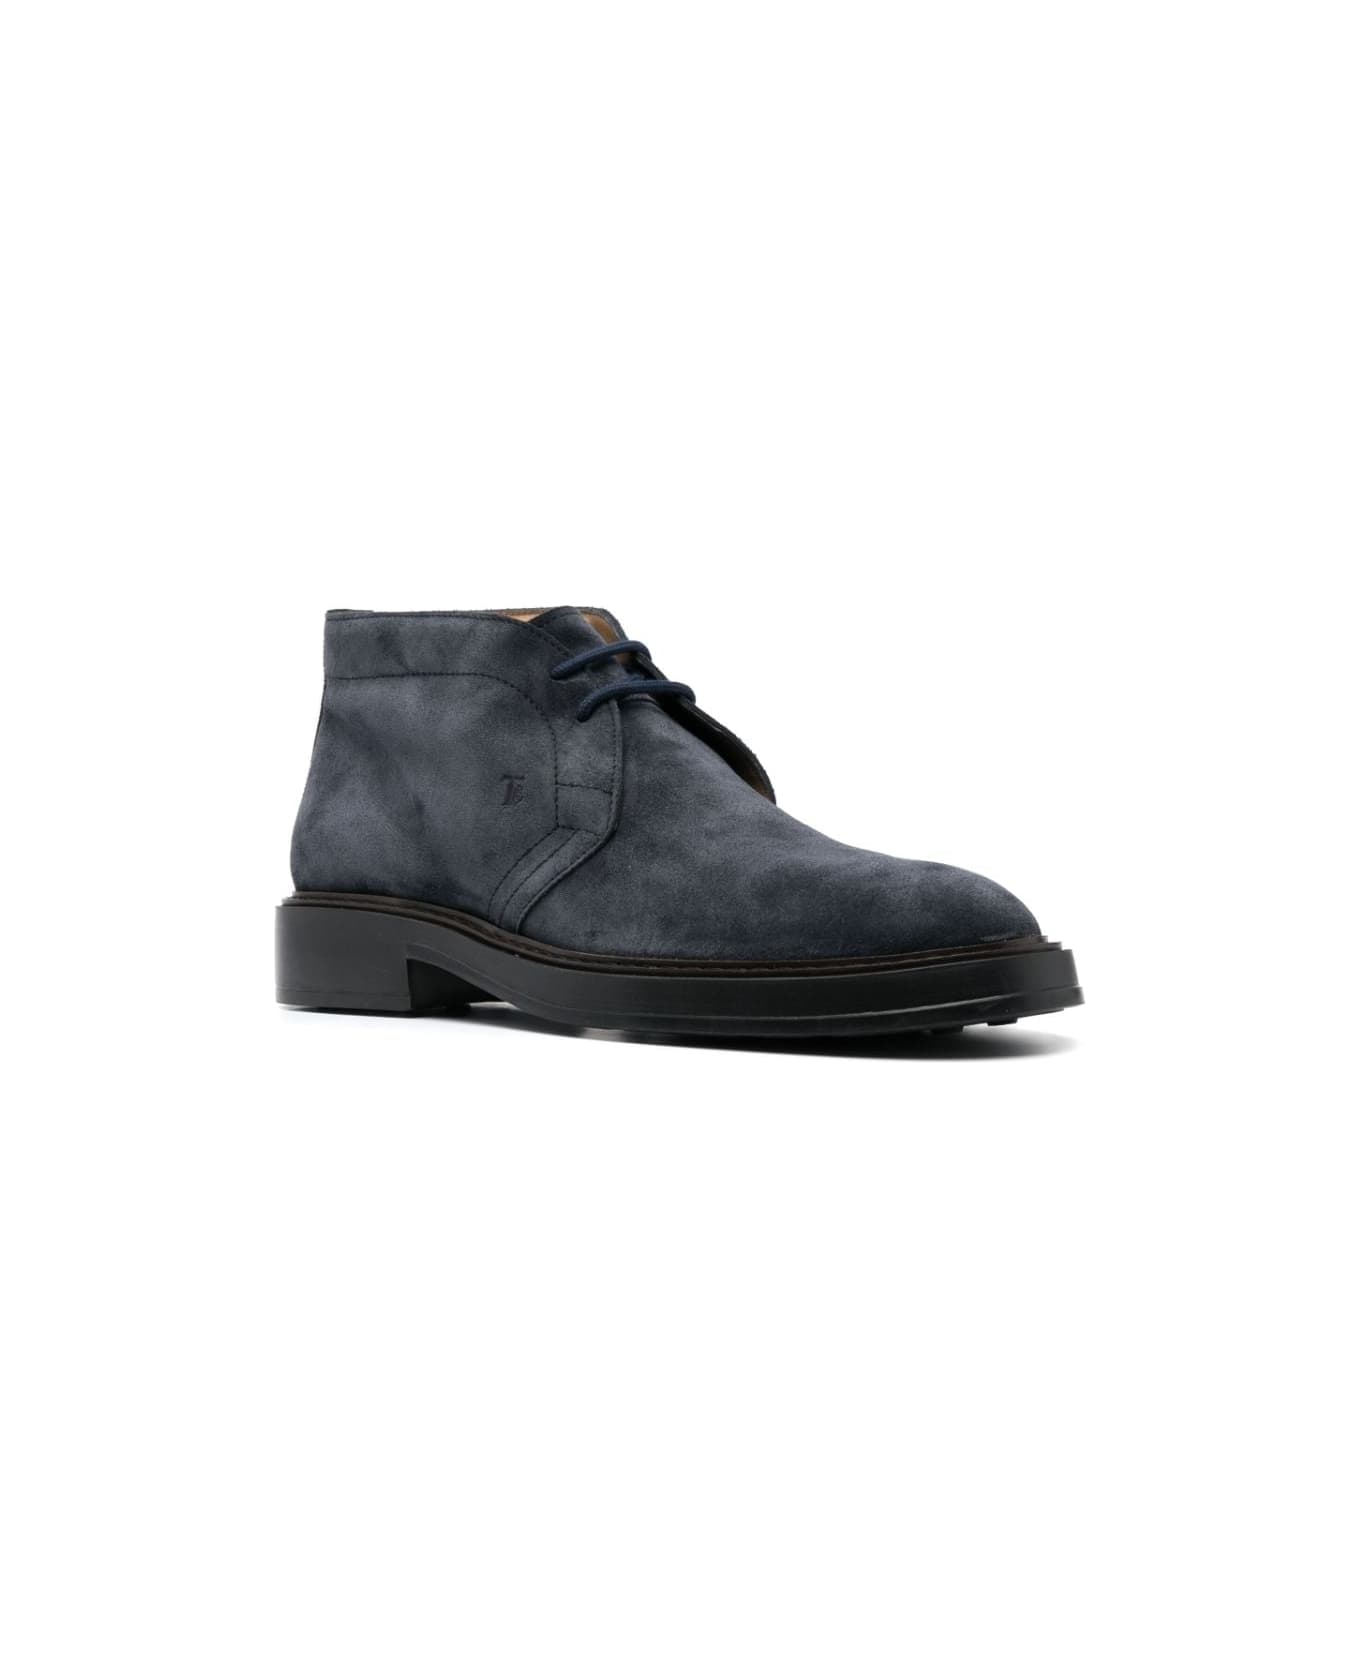 Tod's Extralight 61k Ankle Boots - Black